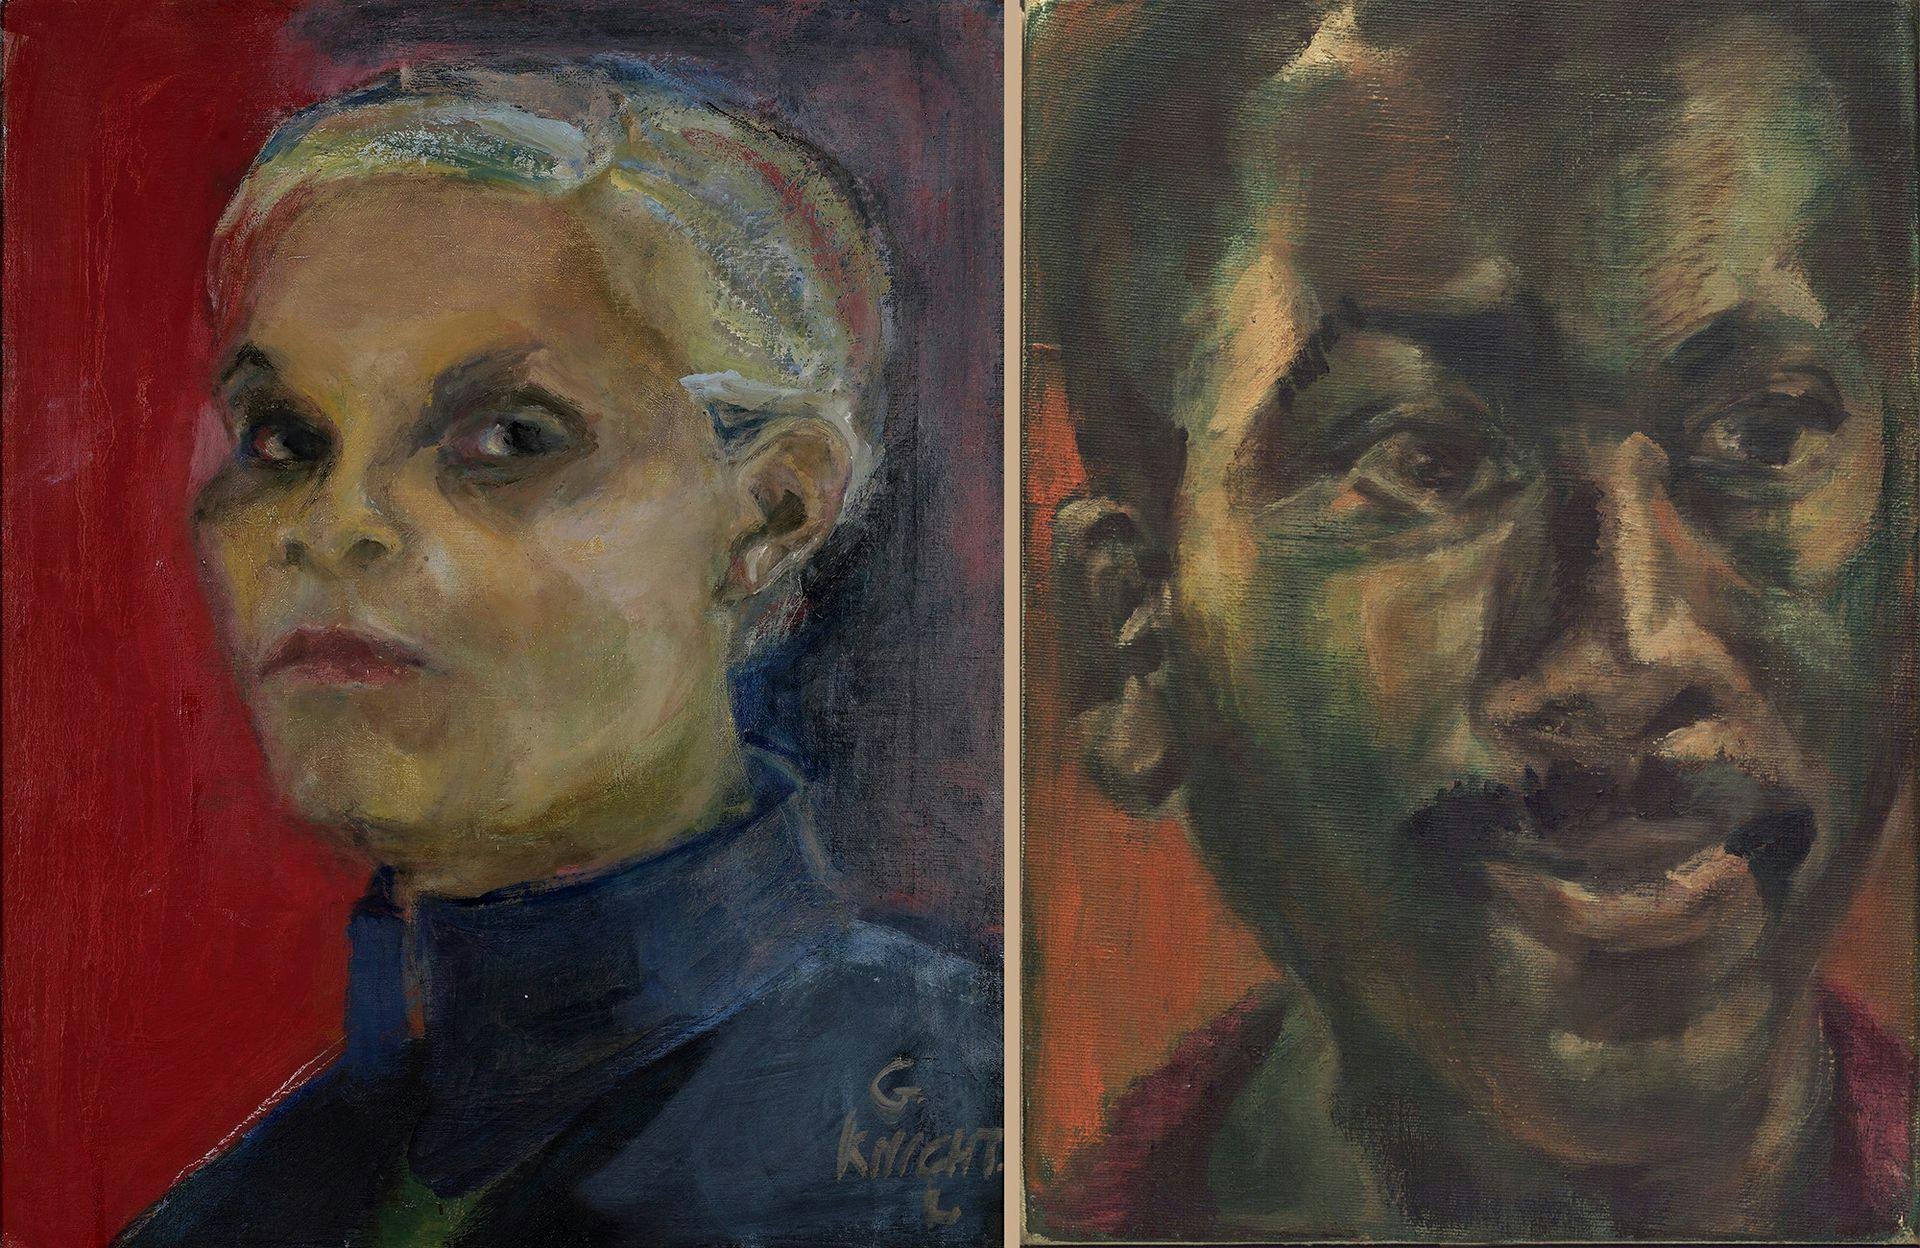 A self-portrait of the artist next to a portrait of her husband, Jacob Lawrence